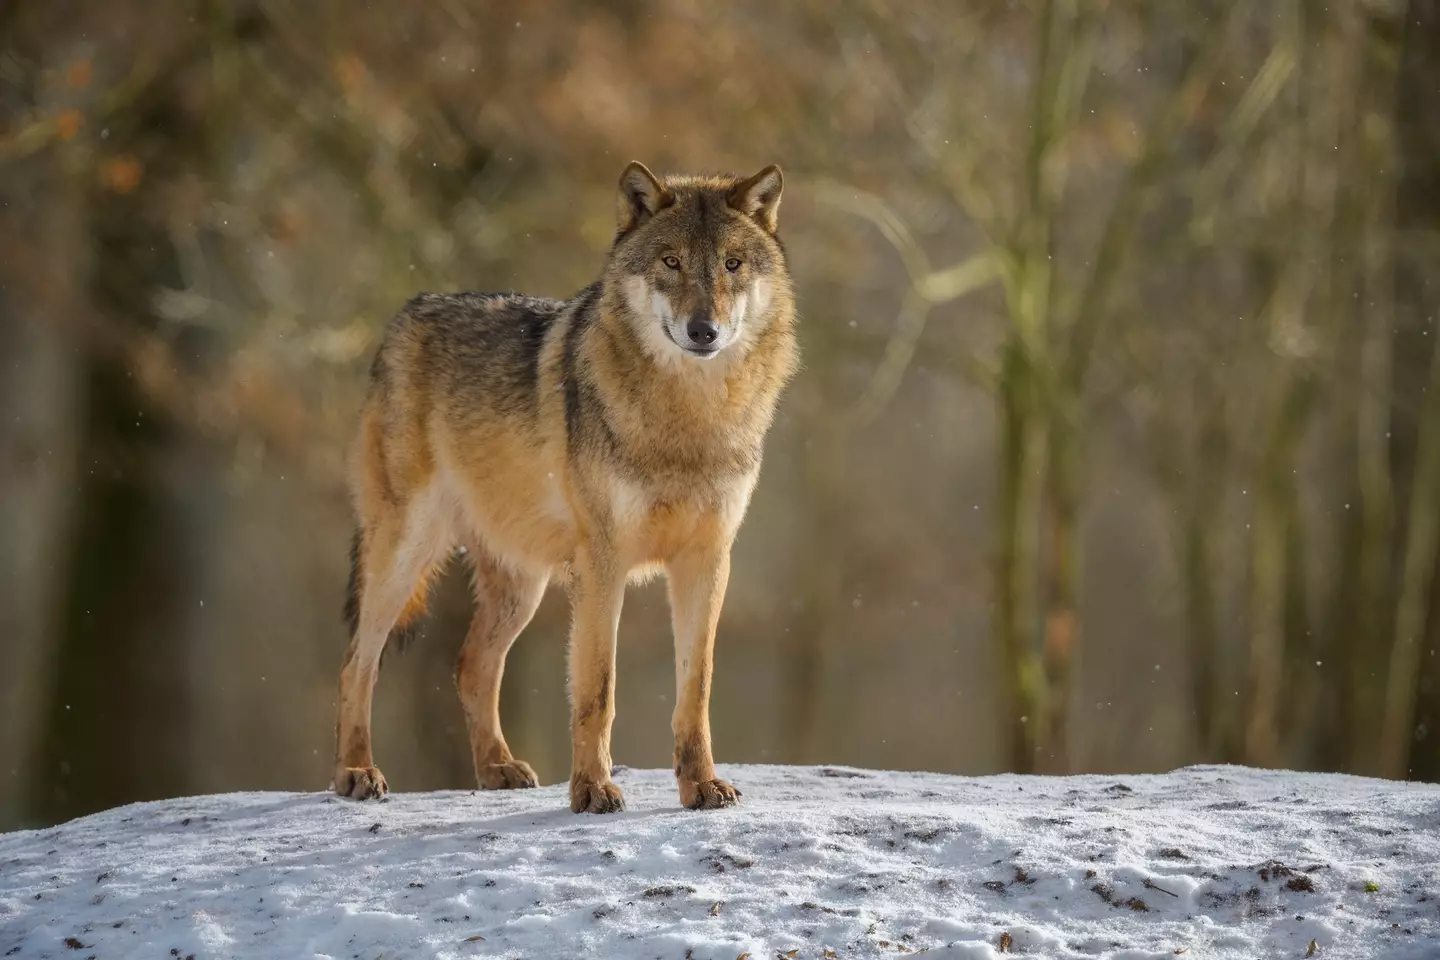 Amazingly, a pack of 'mutant' wolves are able to survive in the radioactive zone.